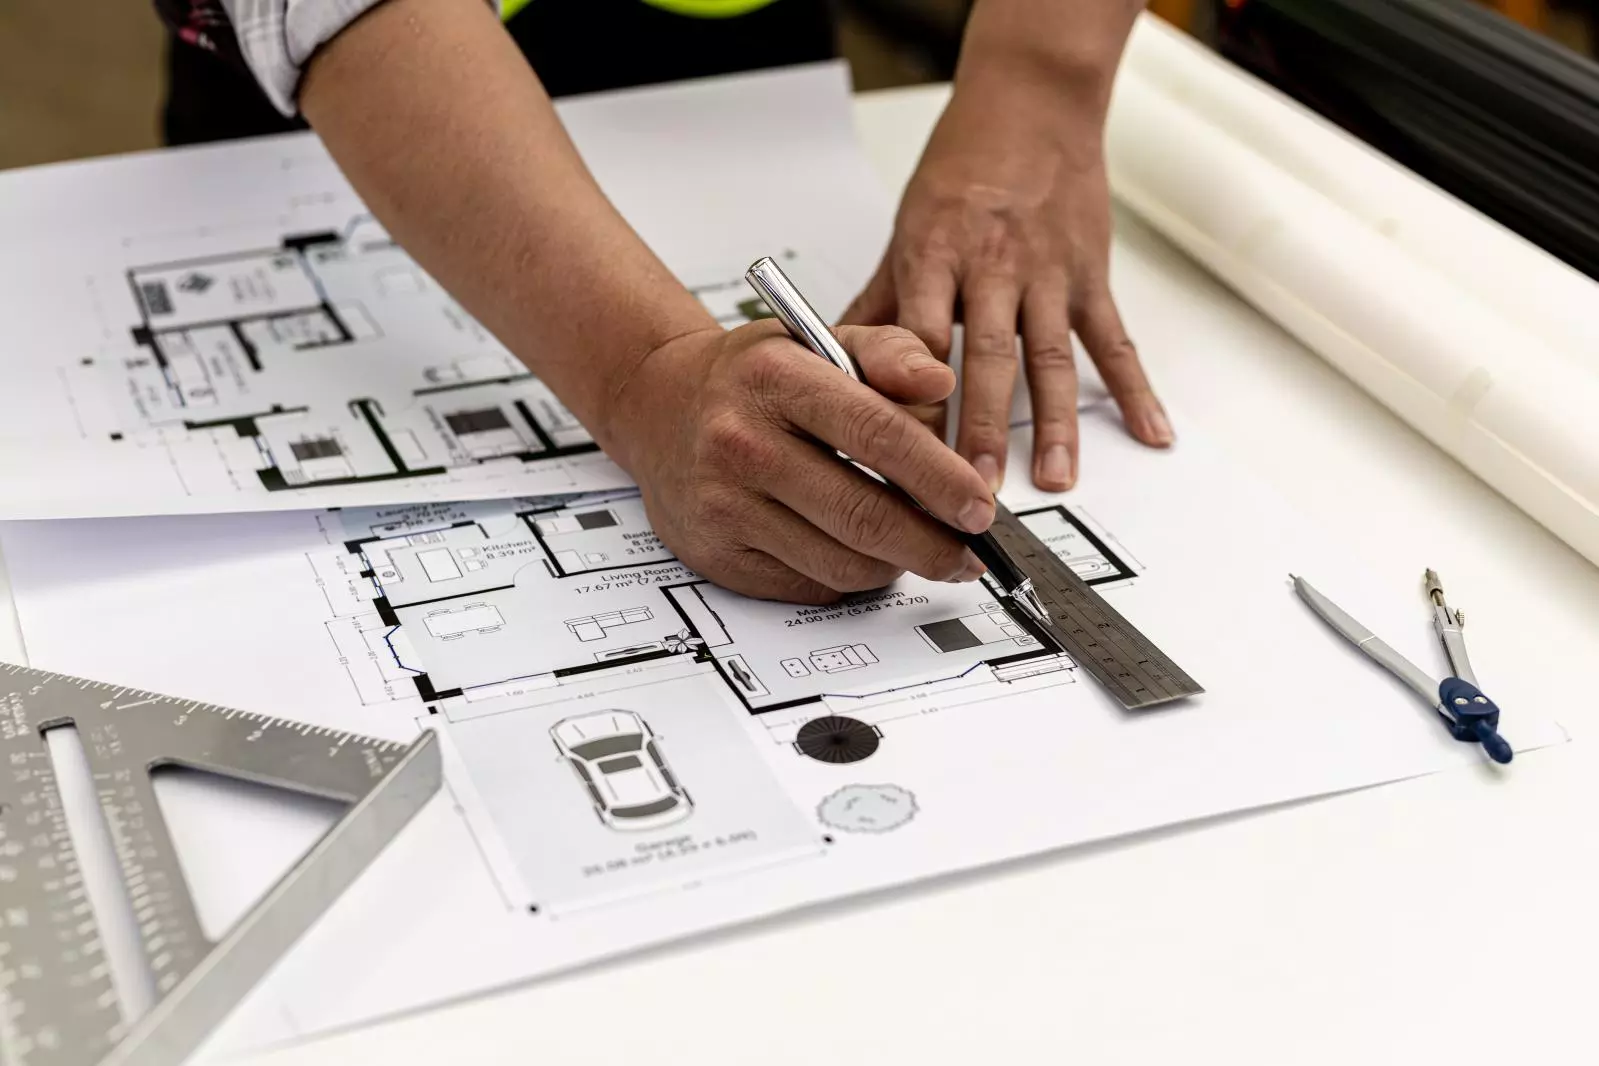 Floor Plans - Architectural Drawing Services London